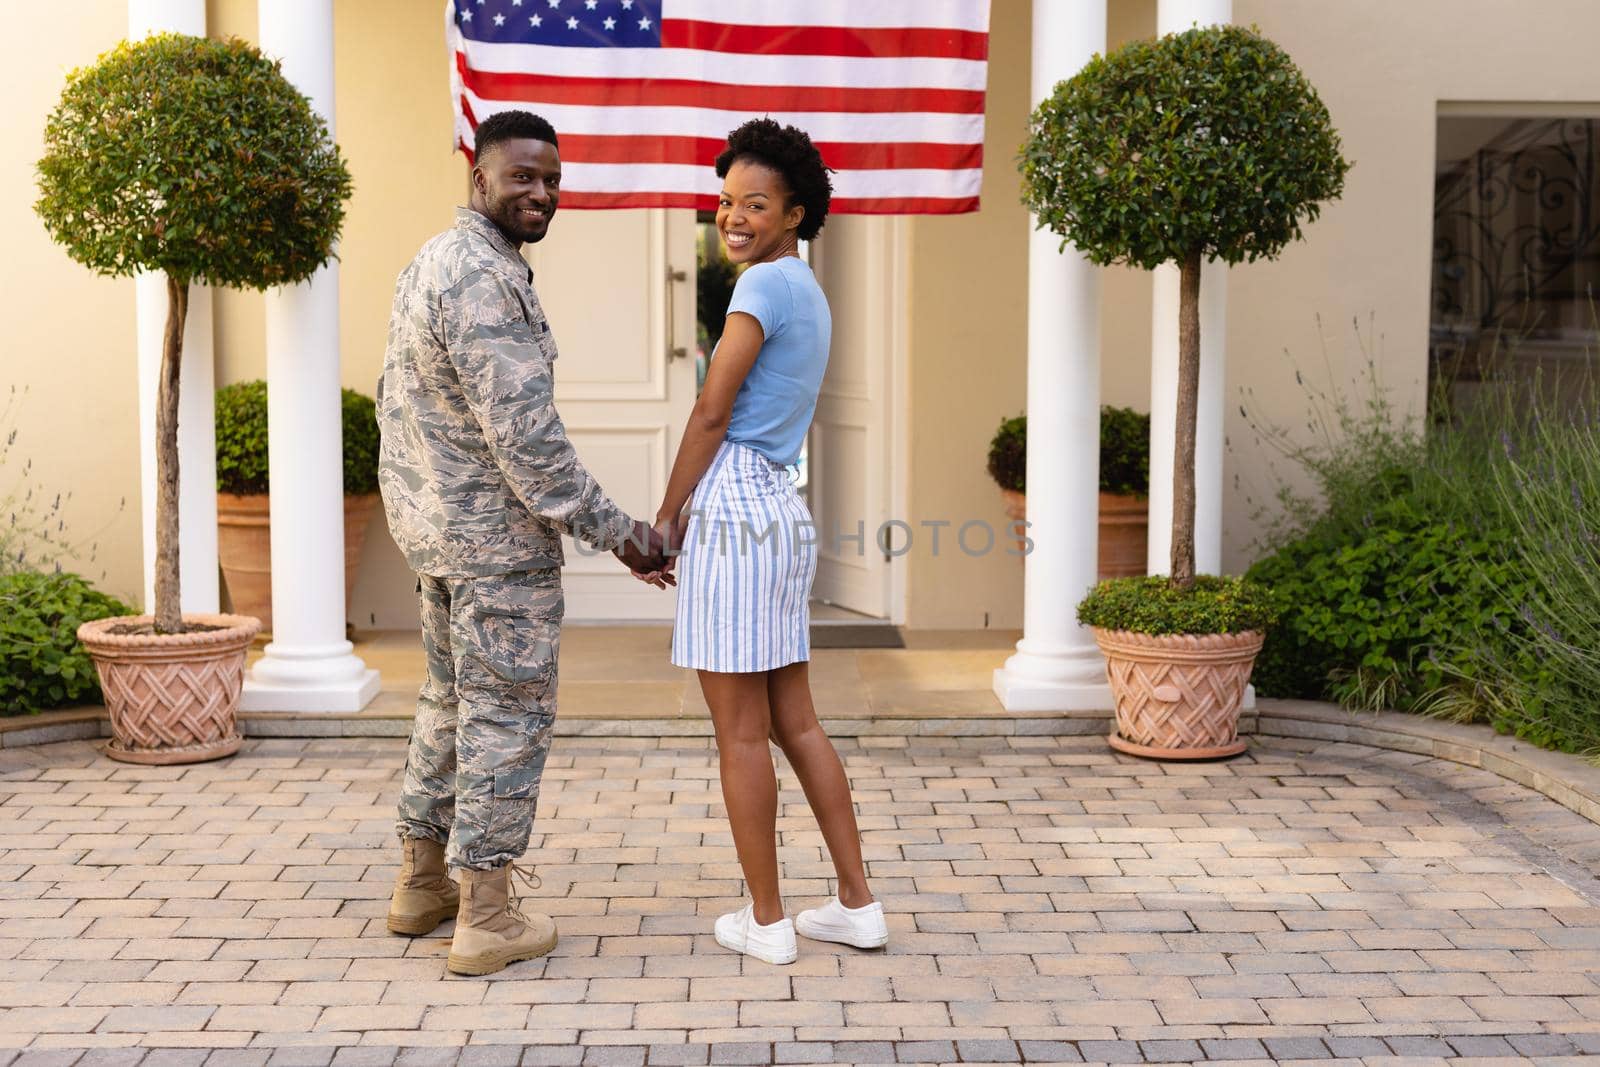 Rear view portrait of smiling african american military man with woman holding hands at entrance. togetherness, bonding and patriotism, unaltered.